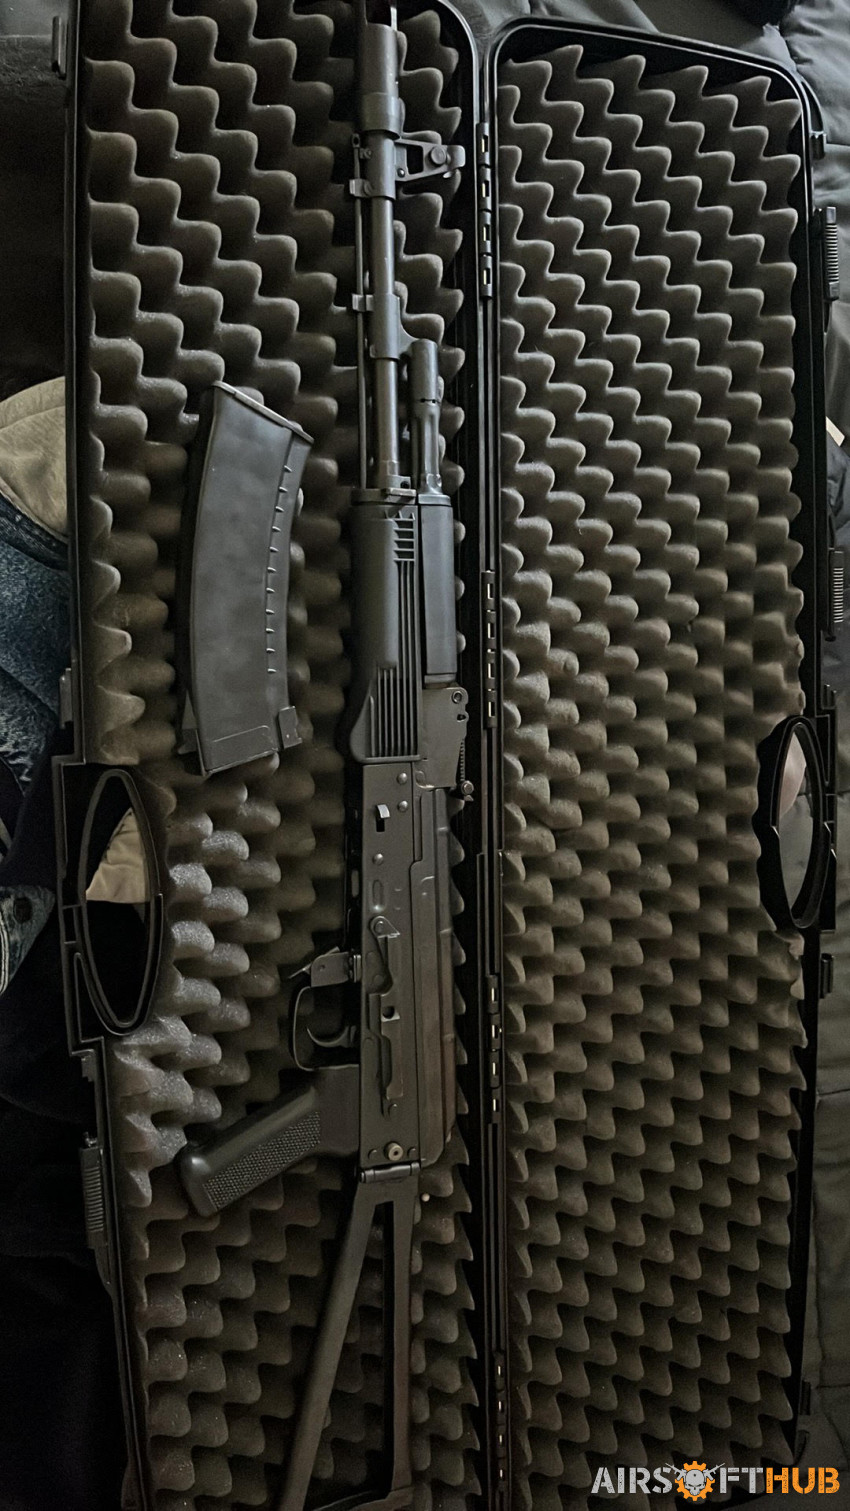 E&L AK74M With Case - Used airsoft equipment